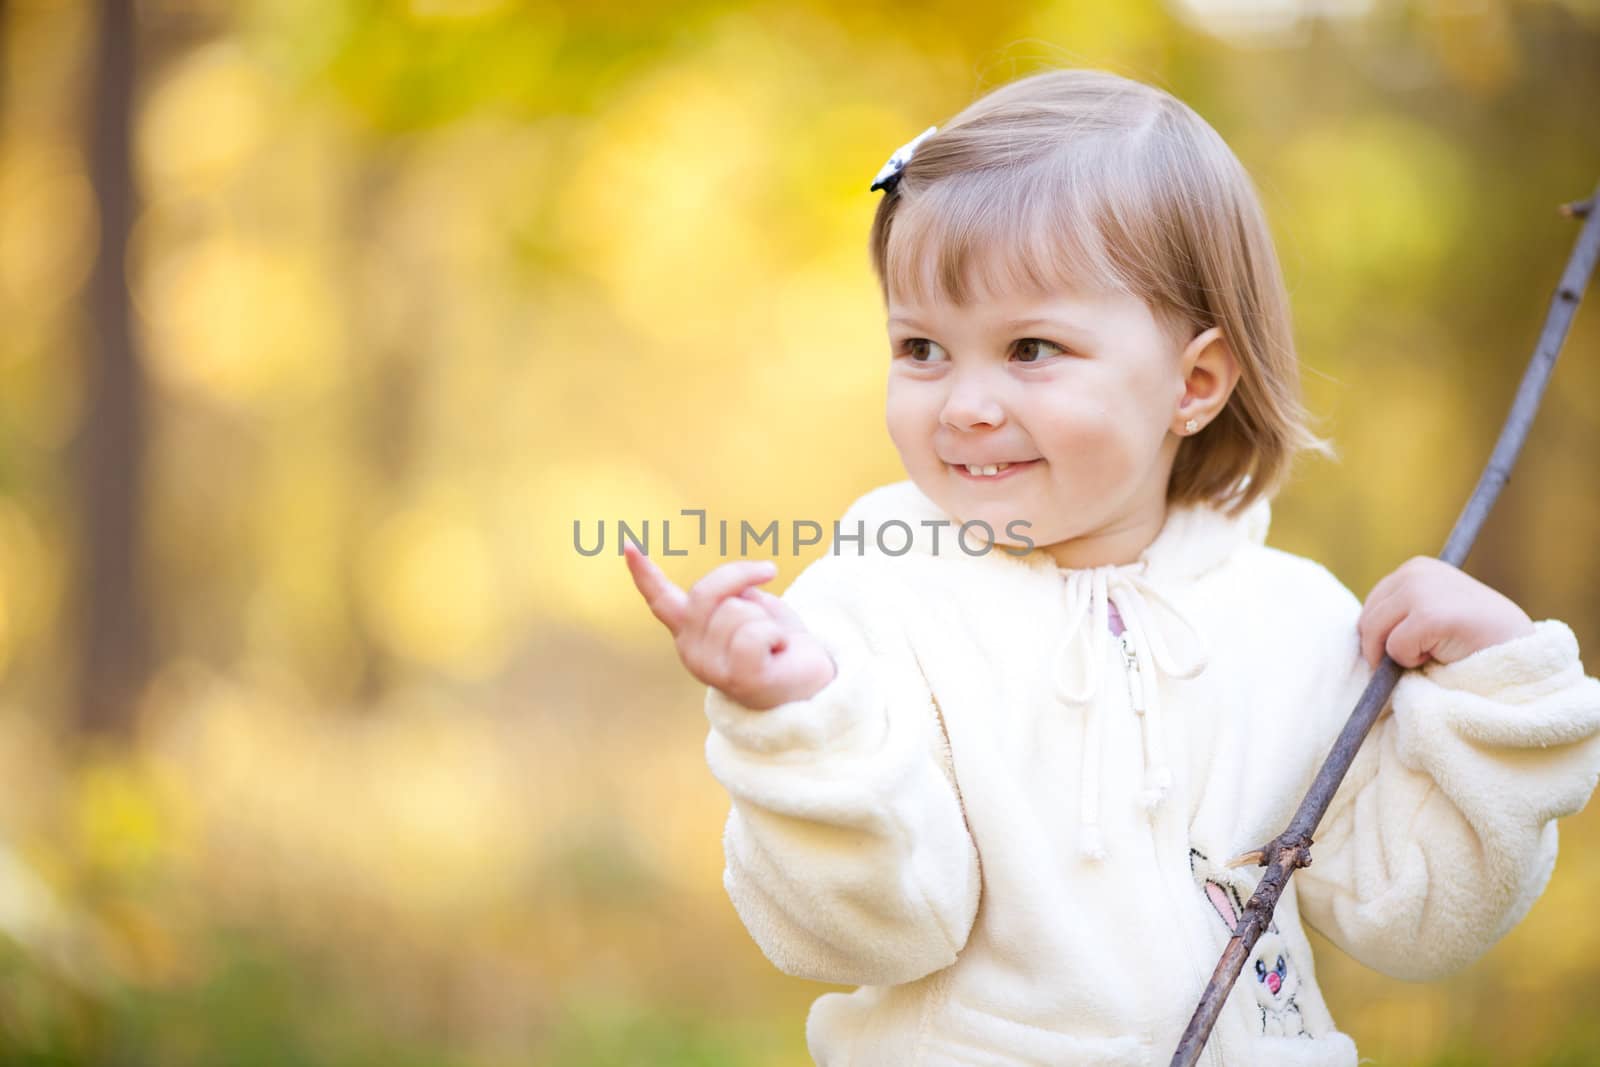 beautiful little girl with a stick on the autumn forest